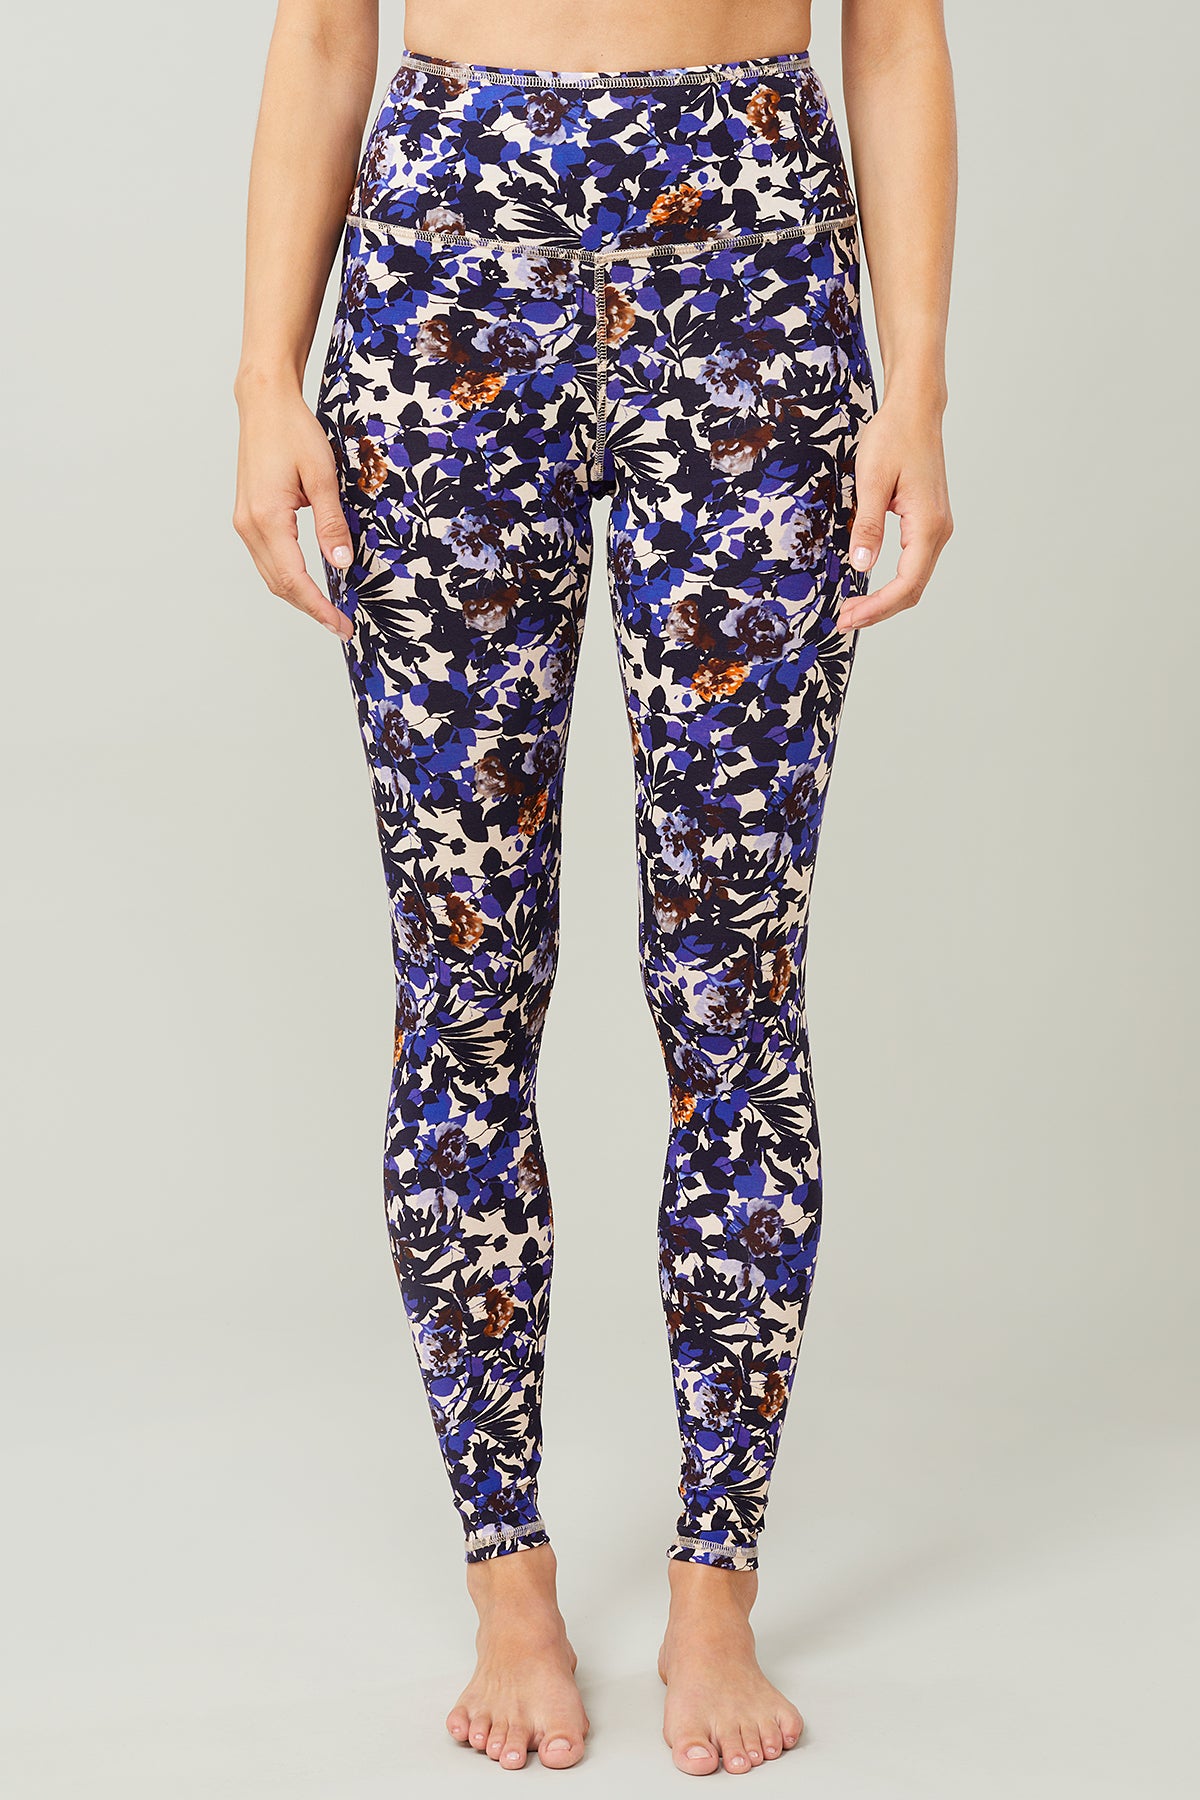 Colourful leopard leggings for a woman. The coolest